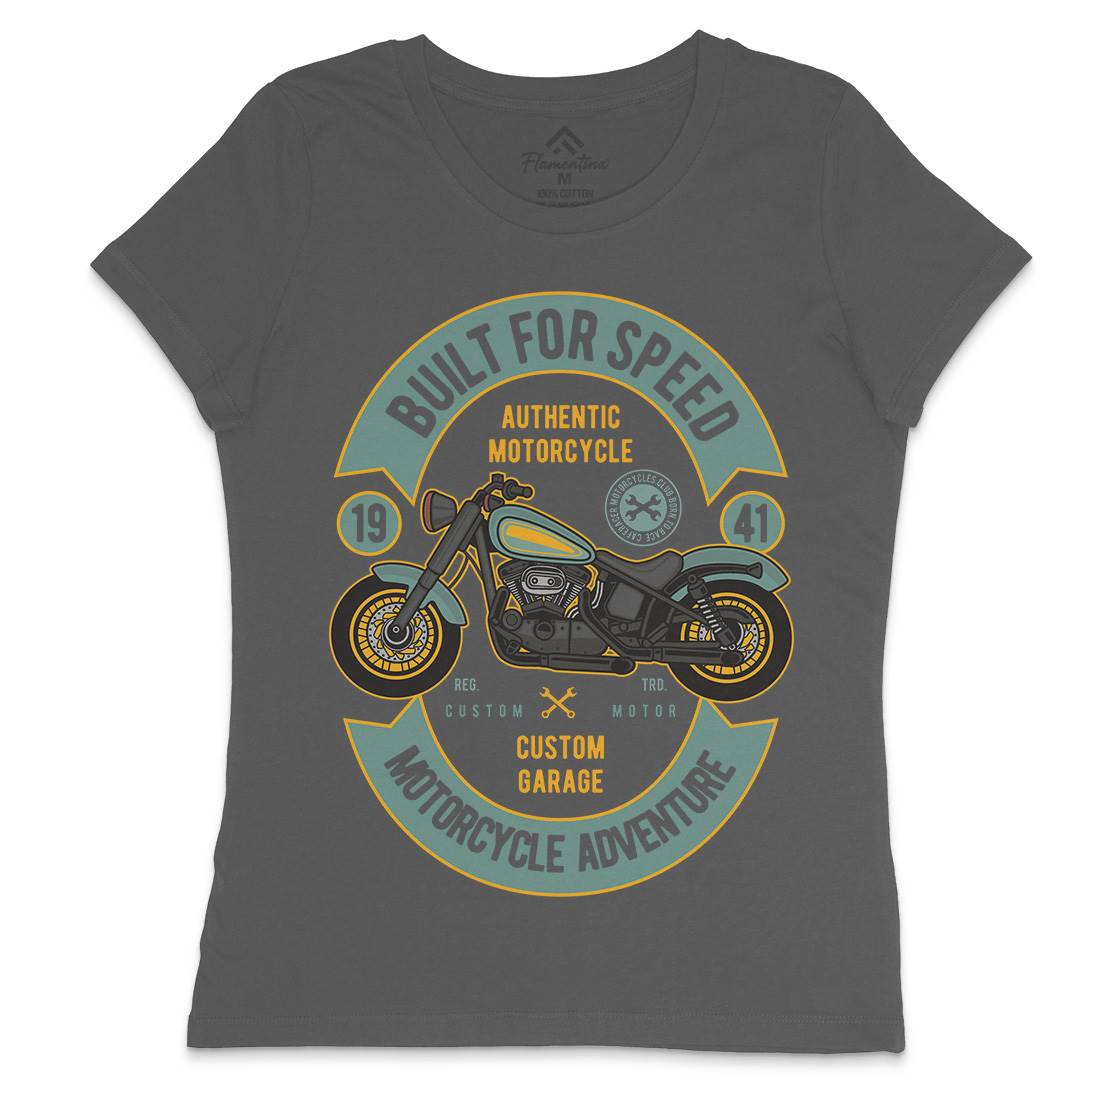 Built For Speed Womens Crew Neck T-Shirt Motorcycles D512